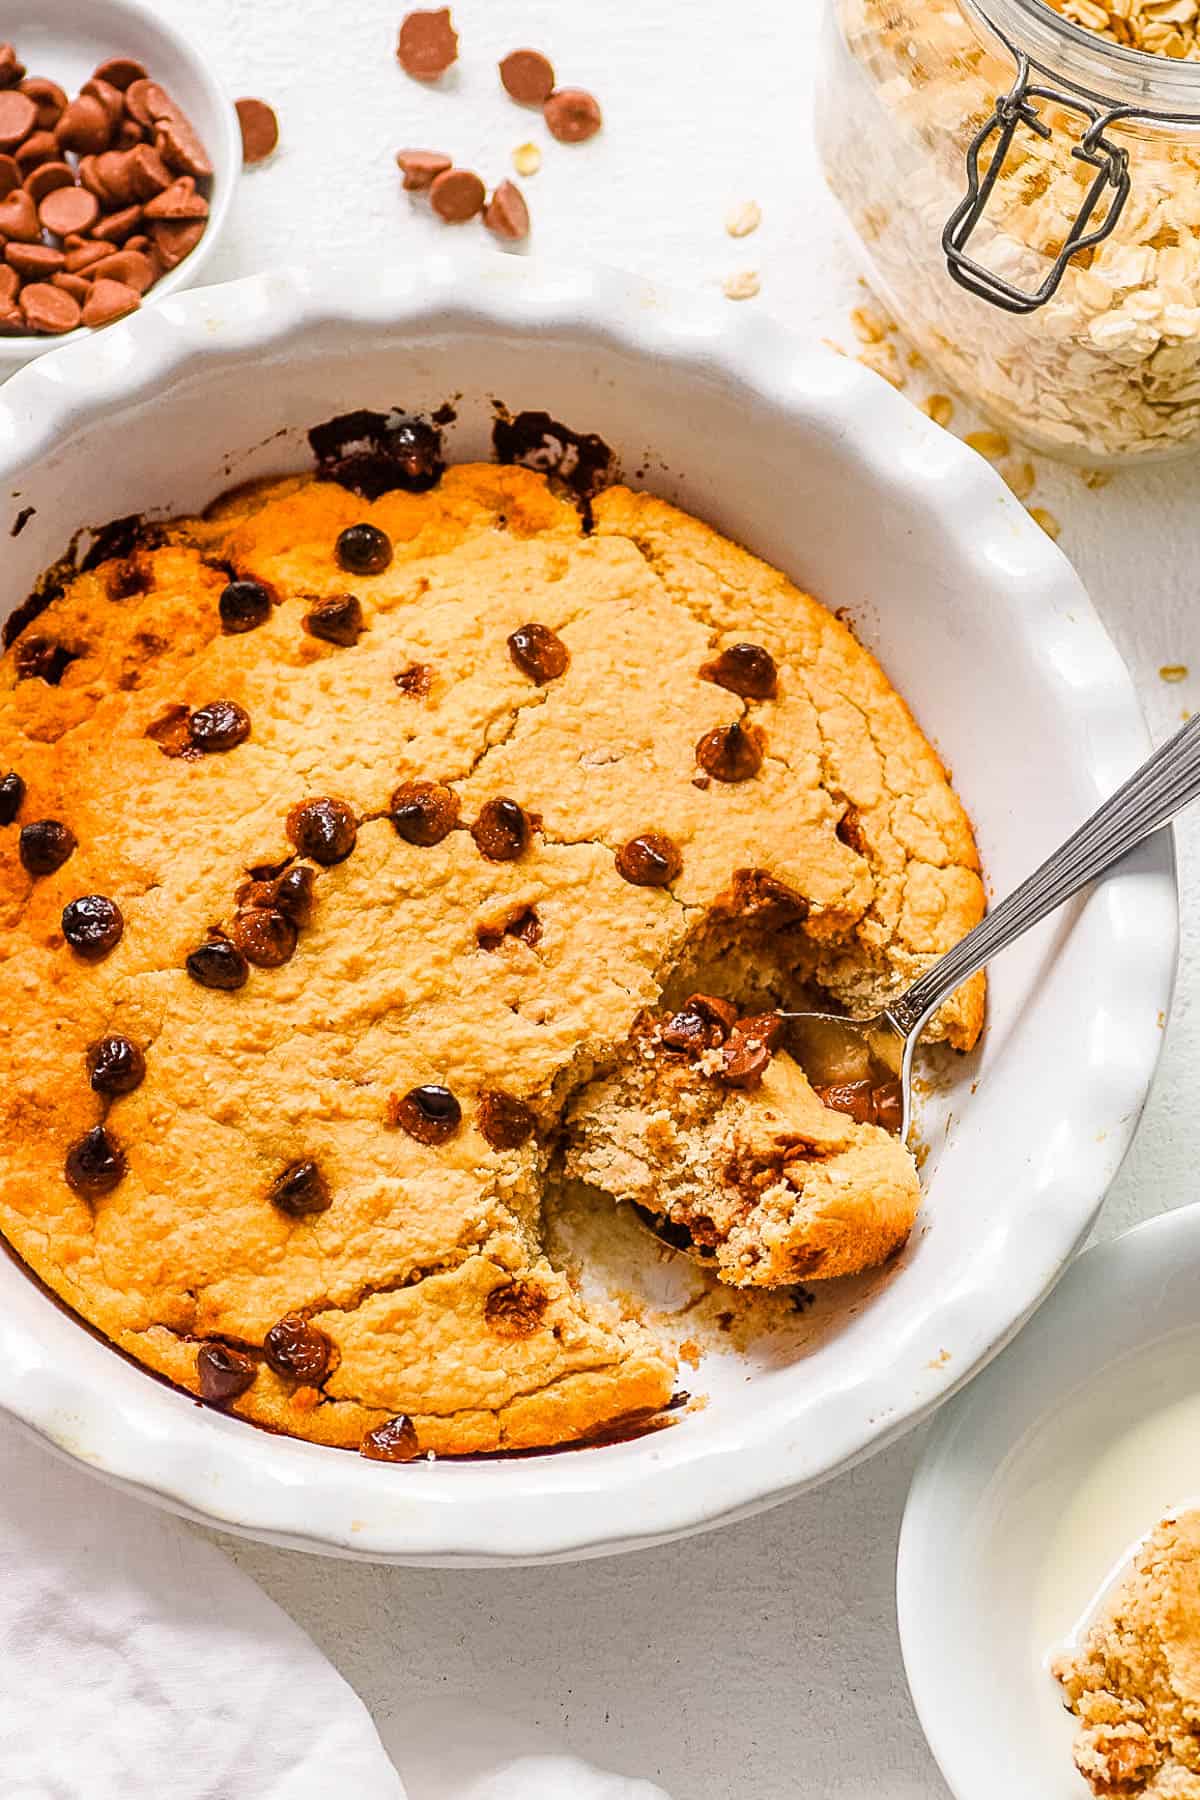 Healthy chocolate chip baked oats in a white baking dish.